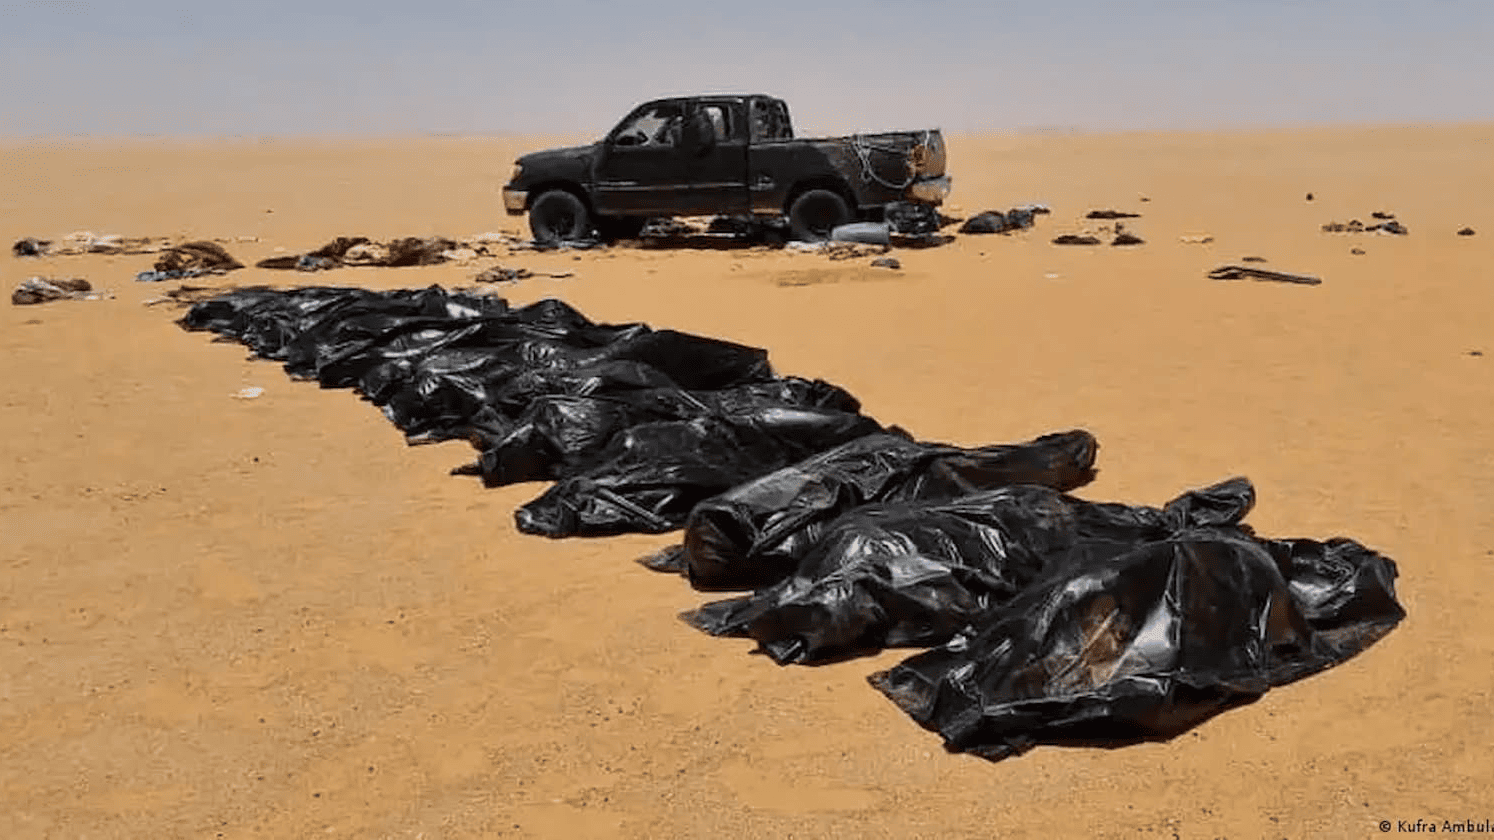 The bodies of 20 migrants have been discovered in the Libyan desert.